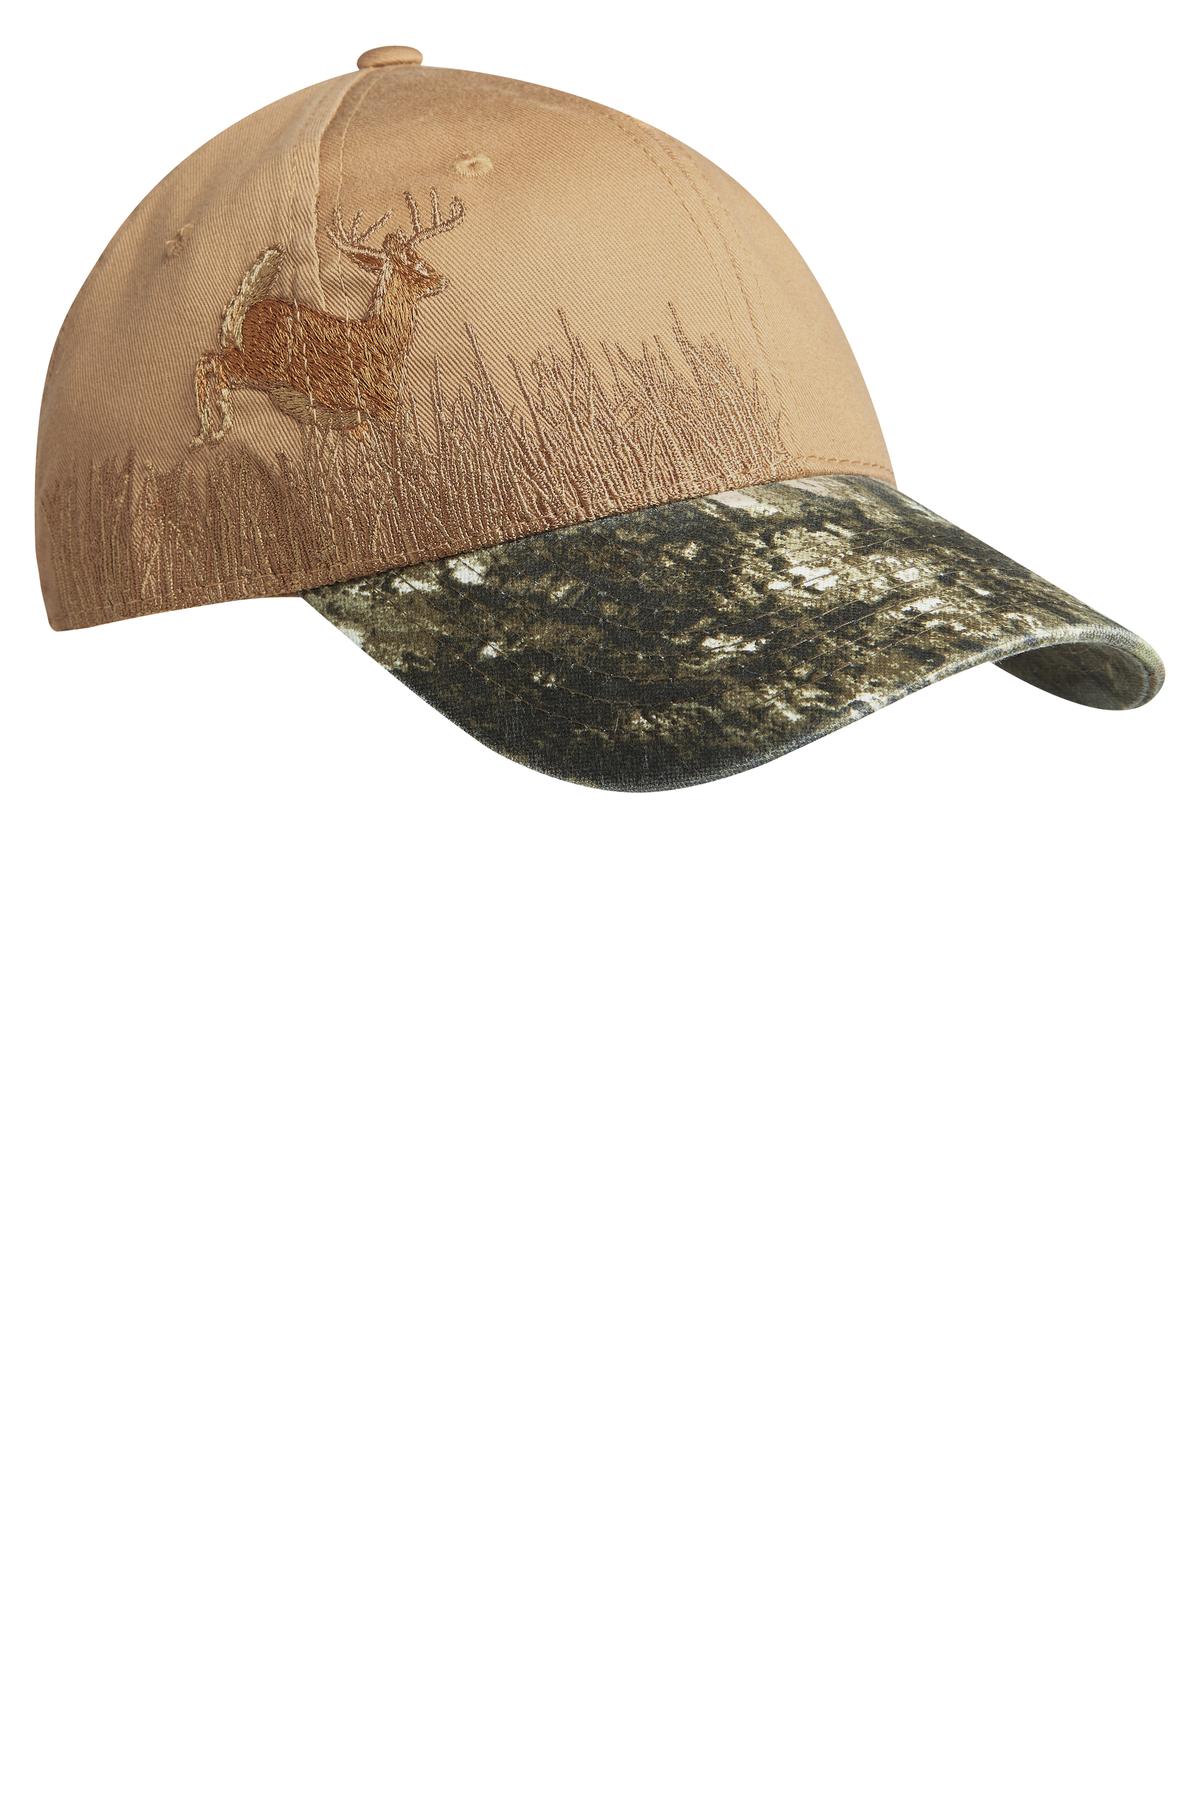 Port Authority Embroidered Camouflage Cap-Port Authority